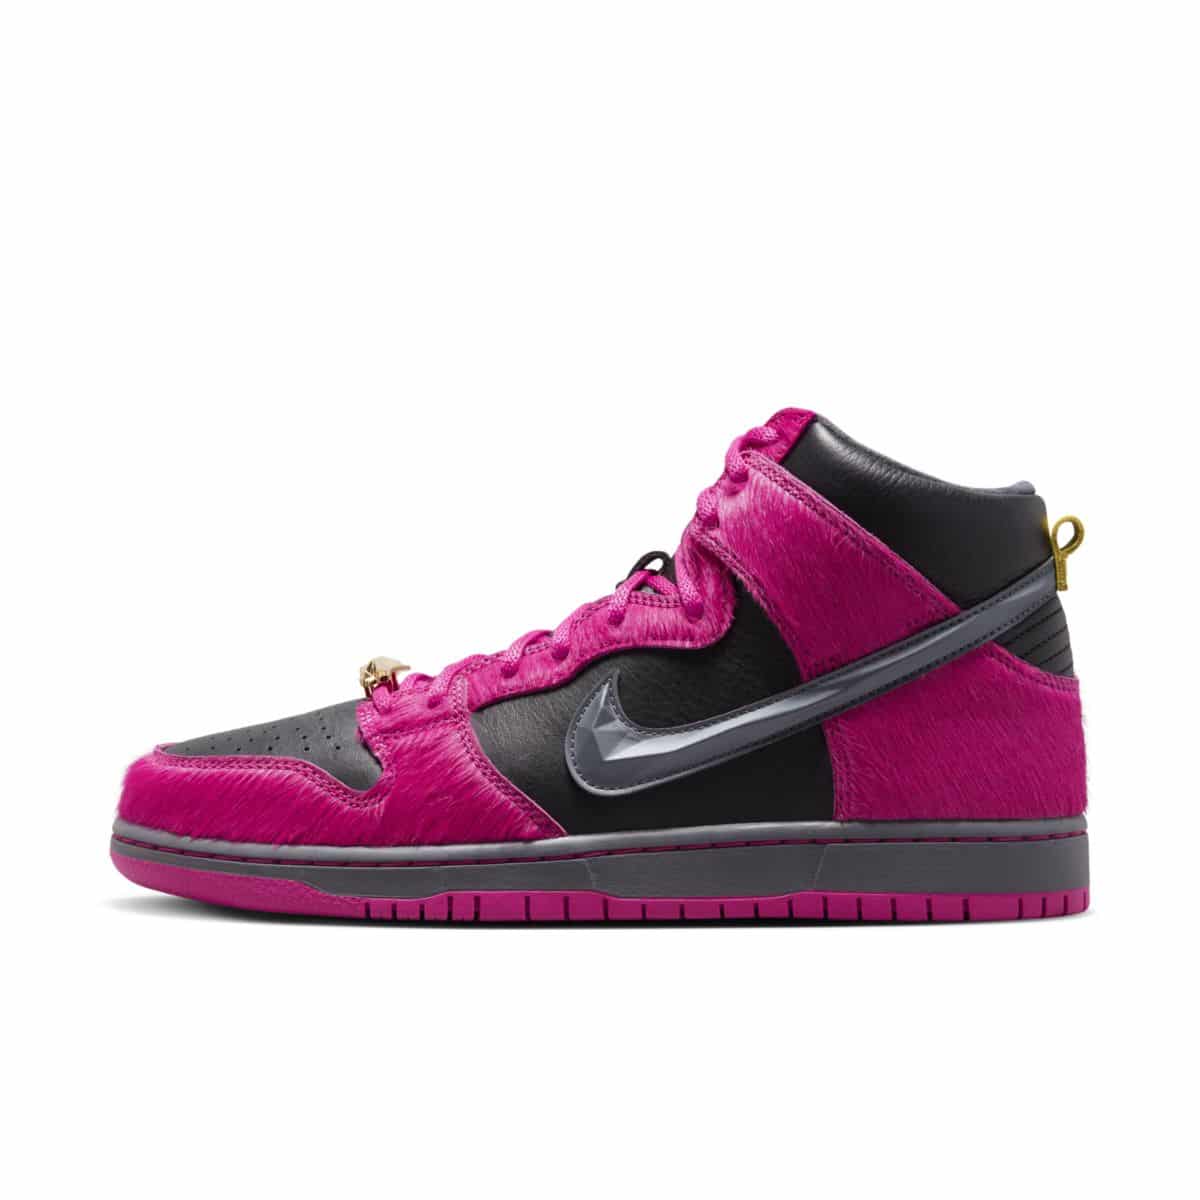 Run The Jewels x Nike SB Dunk High Active Pink DX4356-600 A